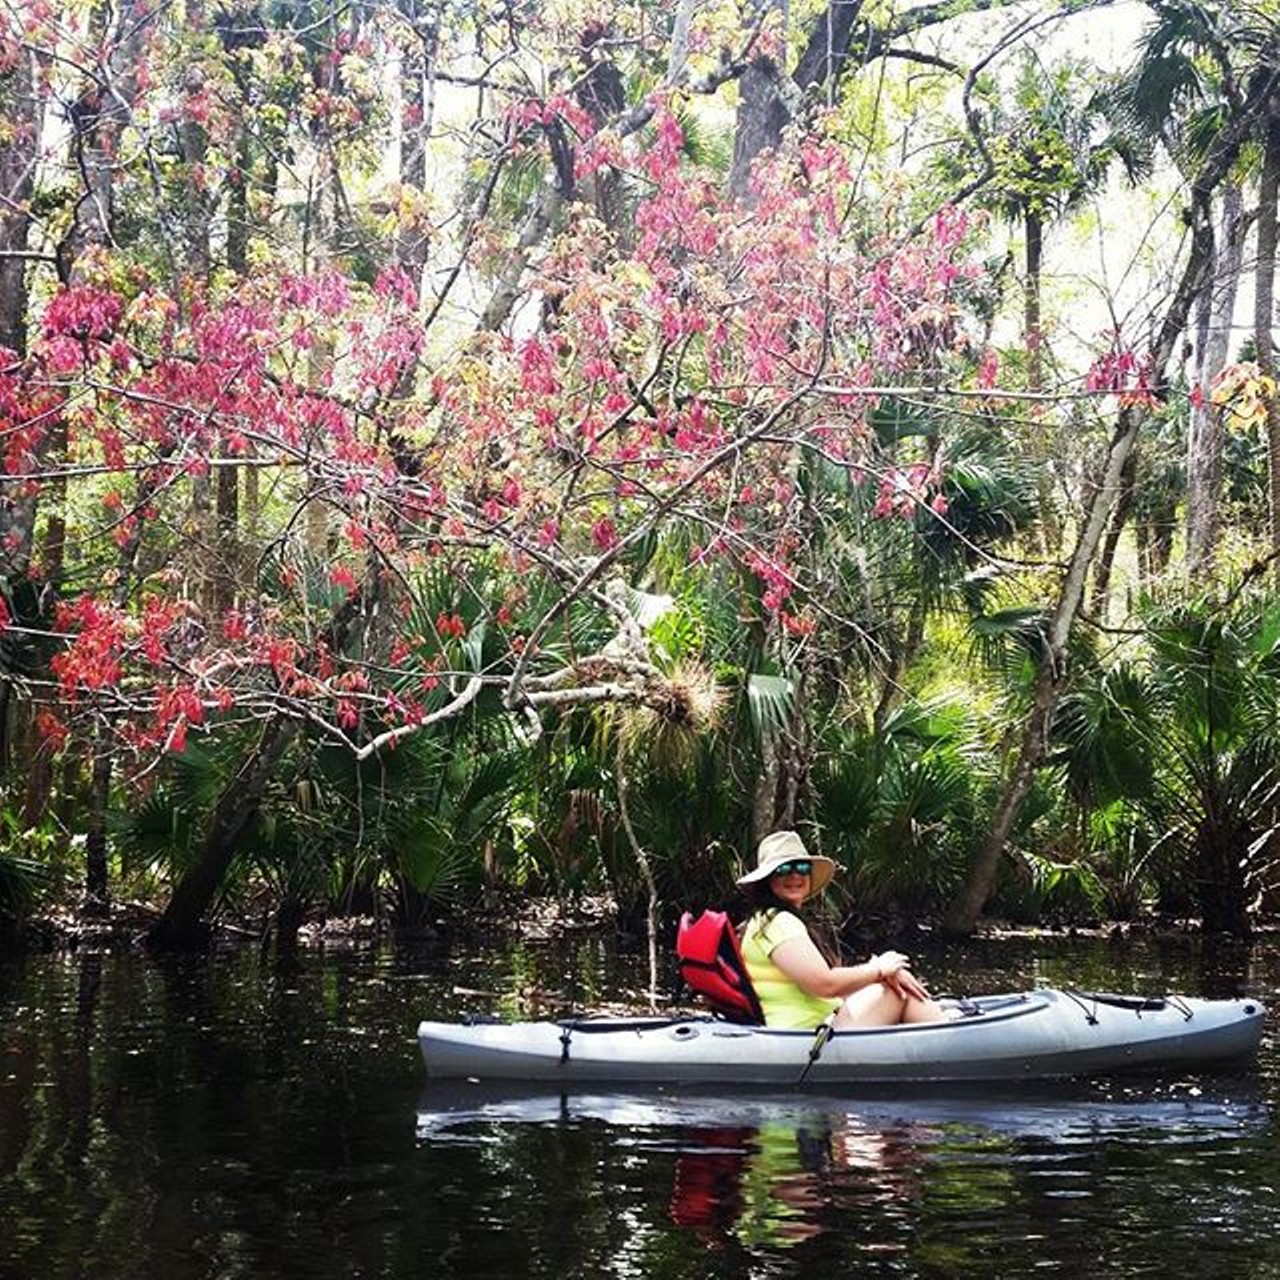 Cracker Creek Canoe  & Kayak Rentals
1795 Taylor Rd, Port Orange | 352-795-6798
Located in Port Orange, Cracker Creek offers one of the most "Florida" experiences in the area. Rent canoes or kayaks and float down the brackish of the Spruce River. Be on the lookout for manatee, gators, osprey, heron, jumping mullet, and more.  
Rate: $60 for a 4 hour canoe rental and $40 for a 4 hour kayak rental
Photo via chicksfly2/Instagram